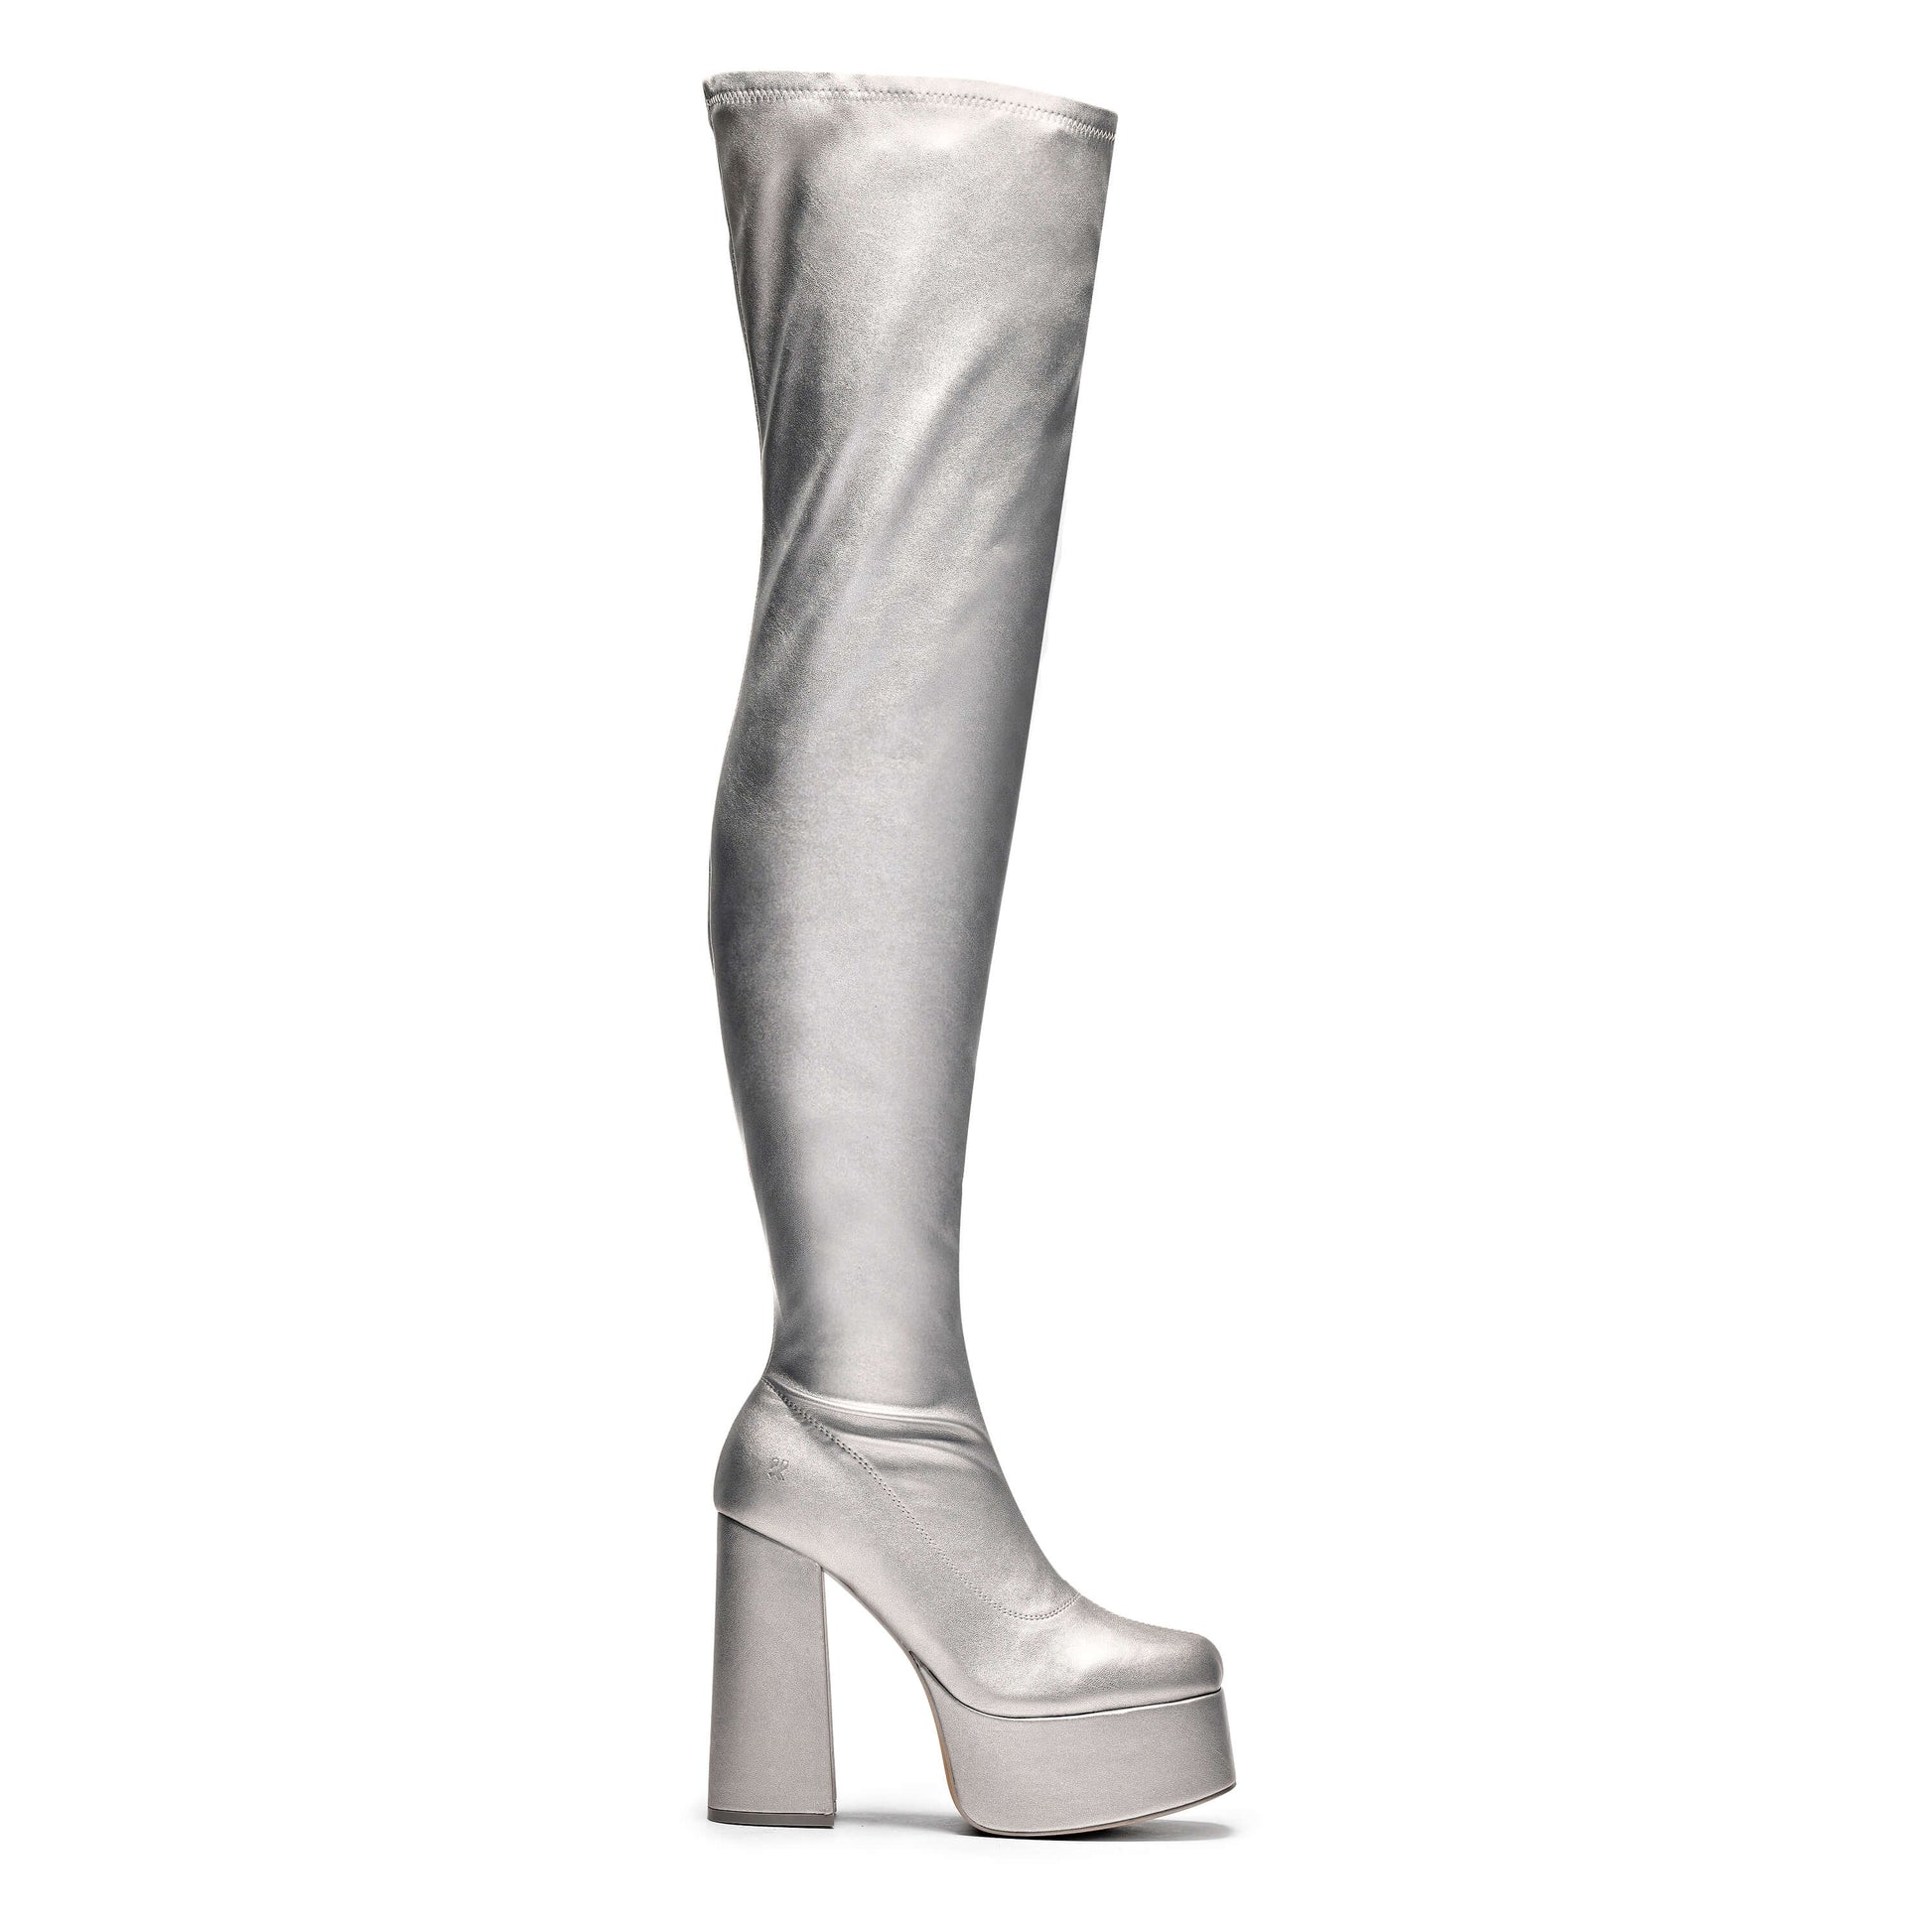 The Redemption Stretch Thigh High Boots - Silver - Long Boots - KOI Footwear - Silver - Side View